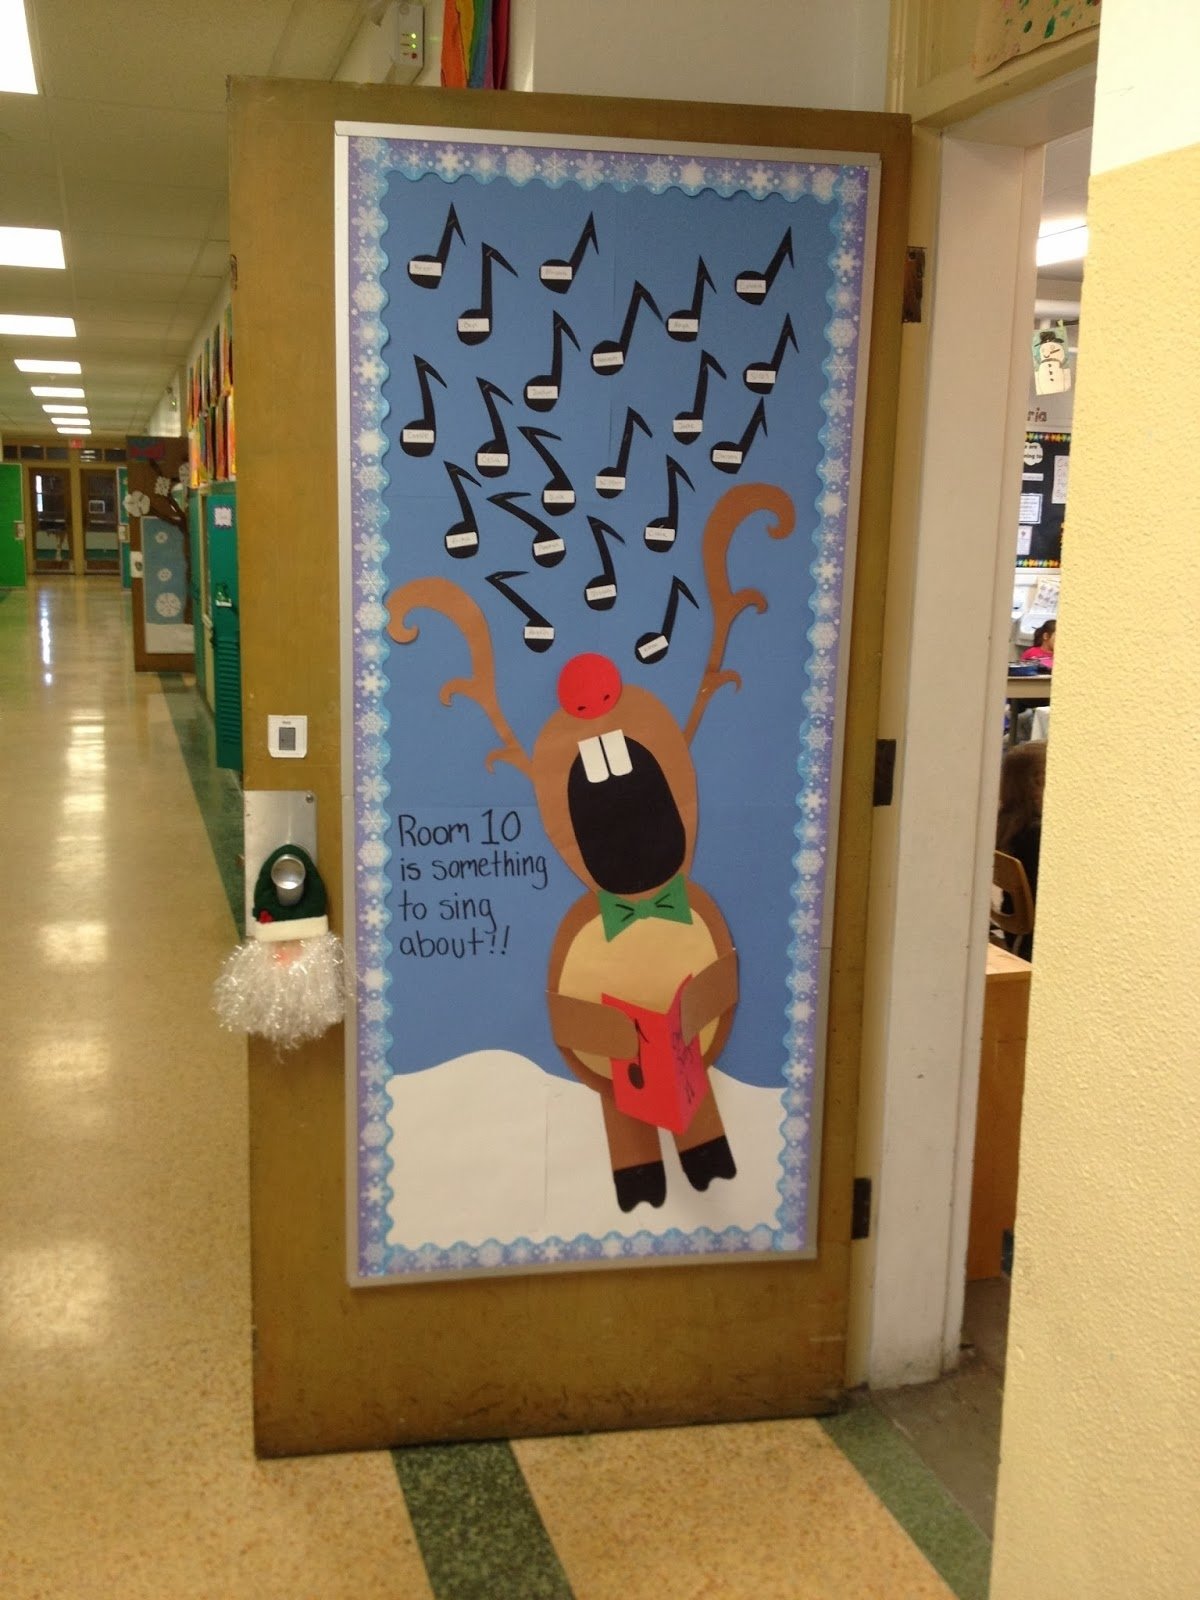 10 Stylish Office Door Decorating Ideas For Christmas christmas door decorations for a classroom the unique ideas of 1 2022